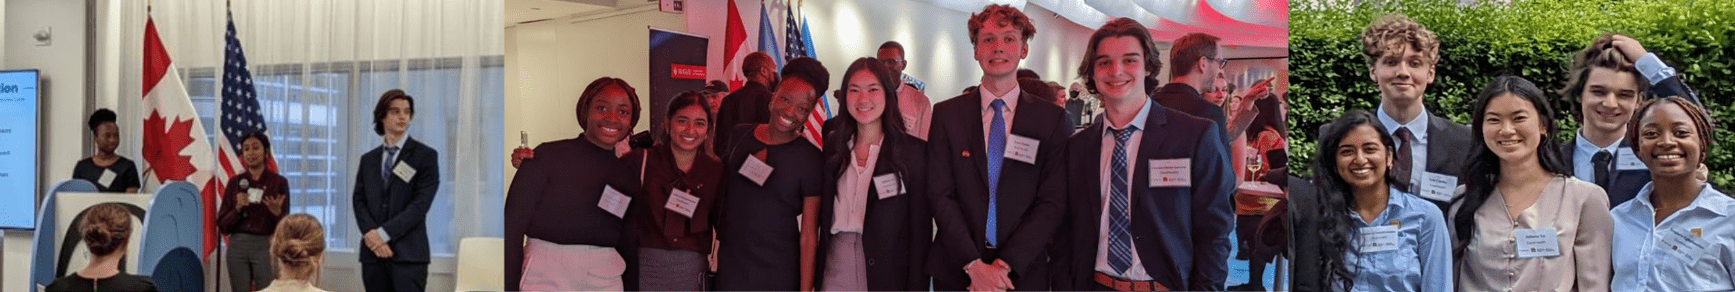 CoolHealth team presenting at Canadian Consulate in New York, CoolHealth team photos